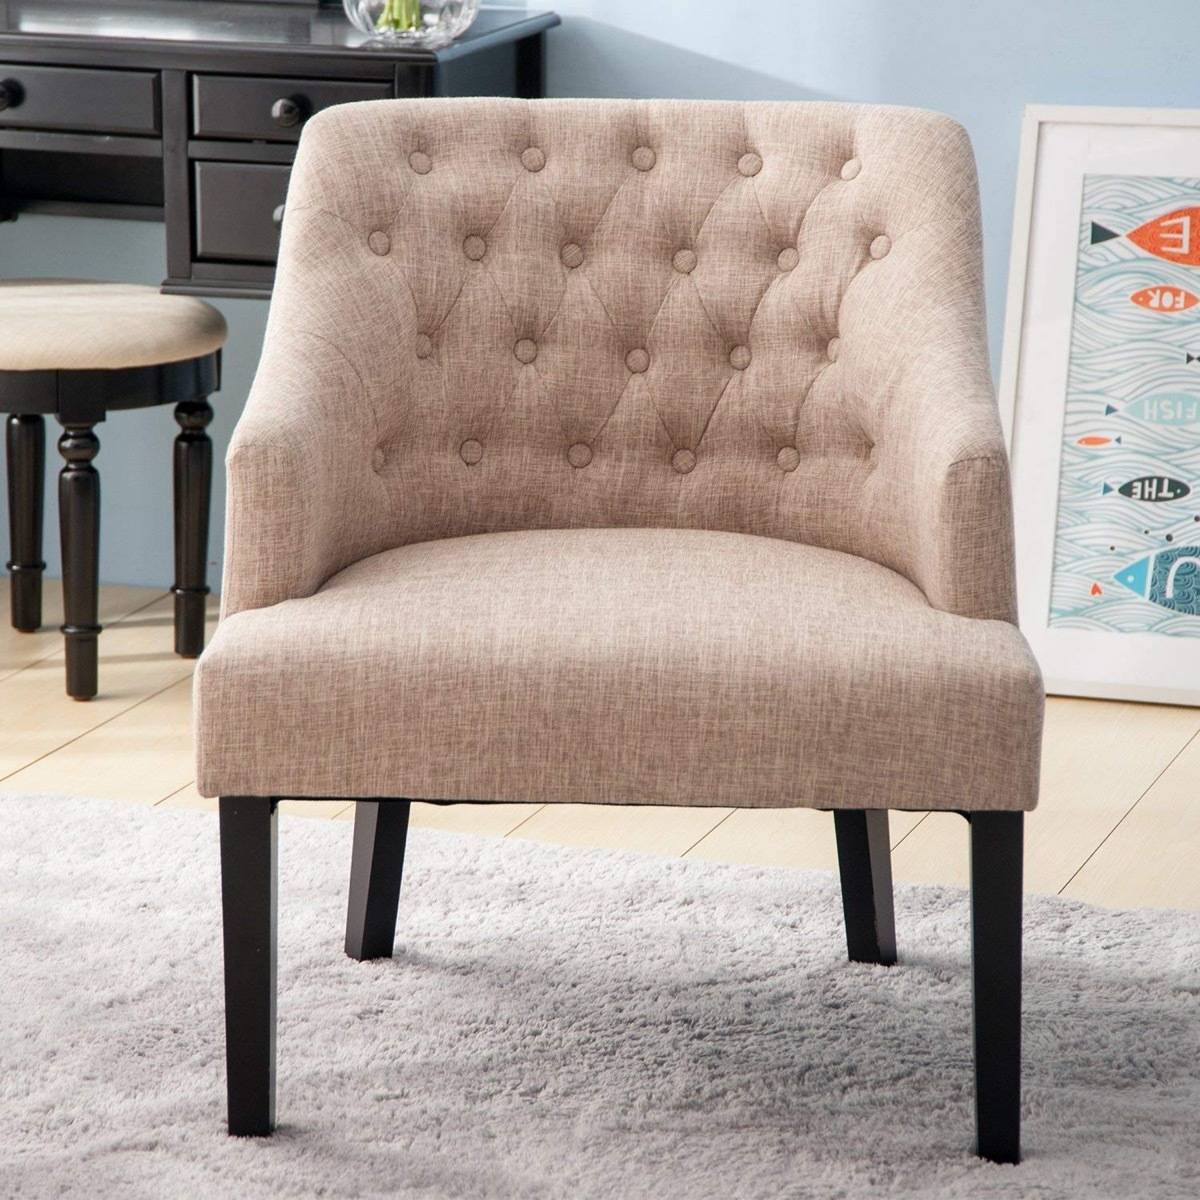 Contemporary accent chair from Amazon